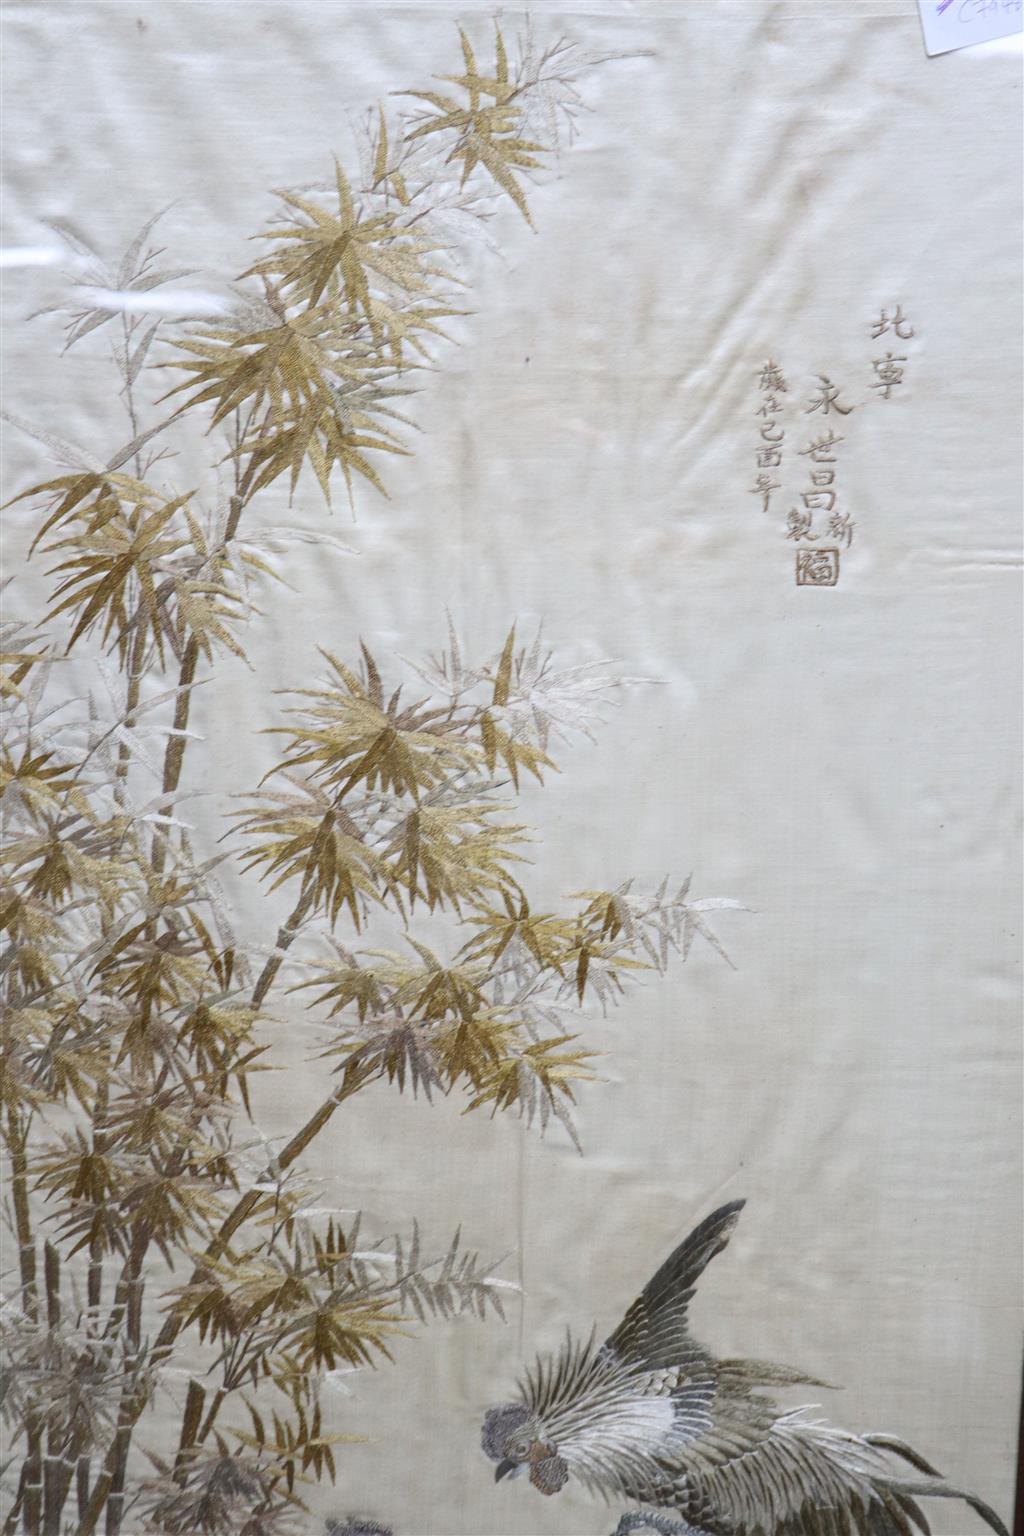 A Japanese embroidered silk cockerel picture